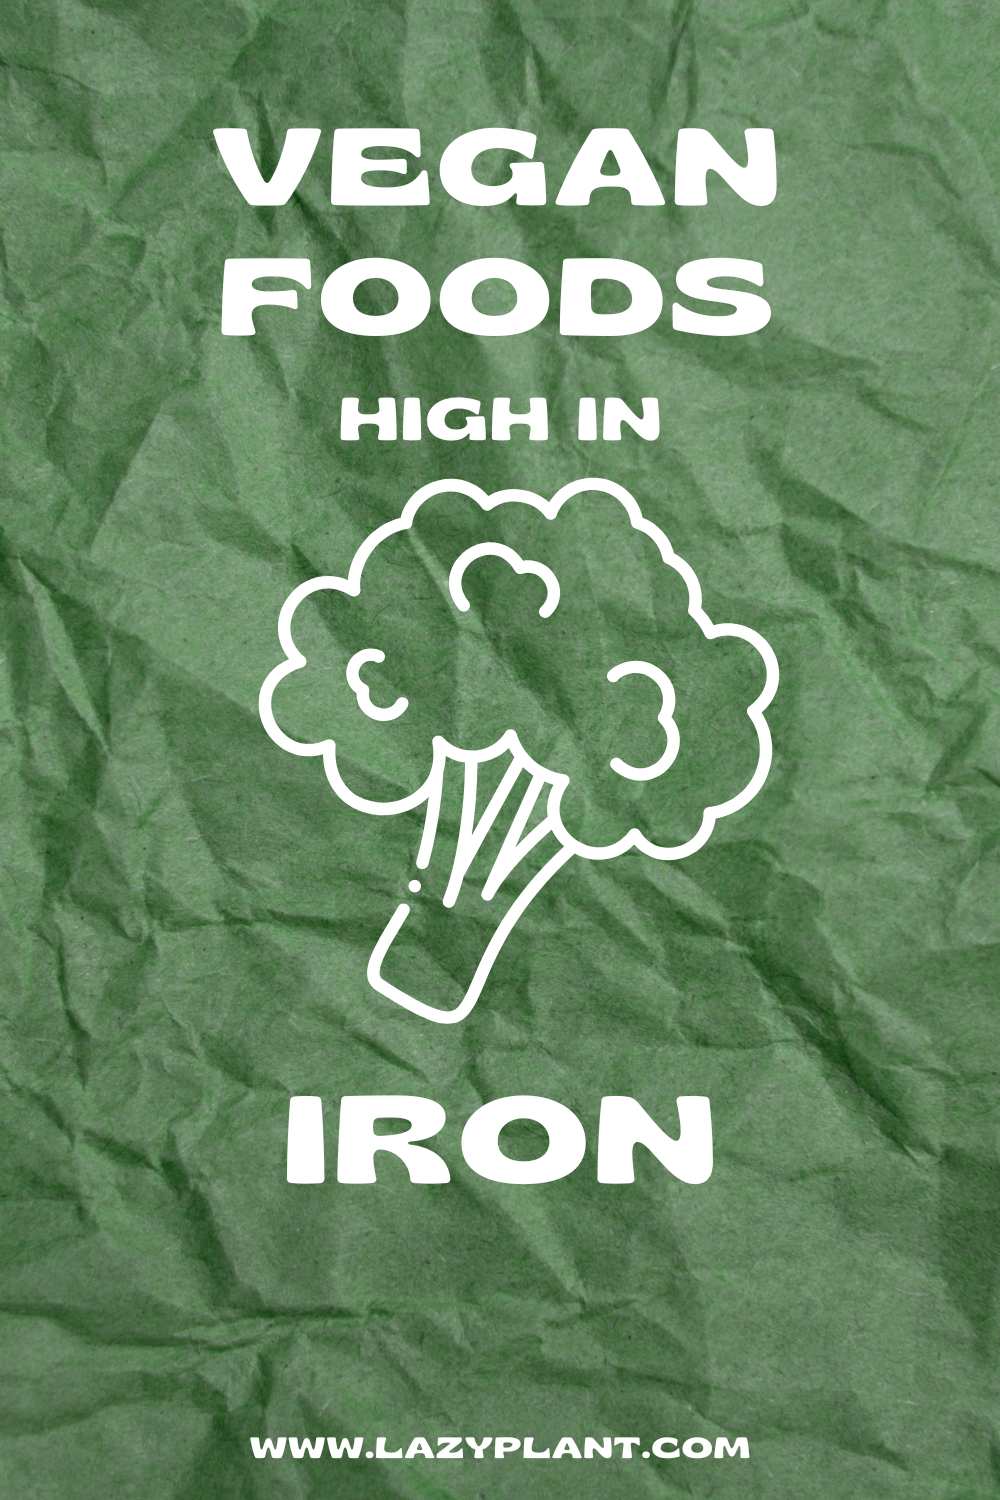 A list of the richest vegan foods in iron.